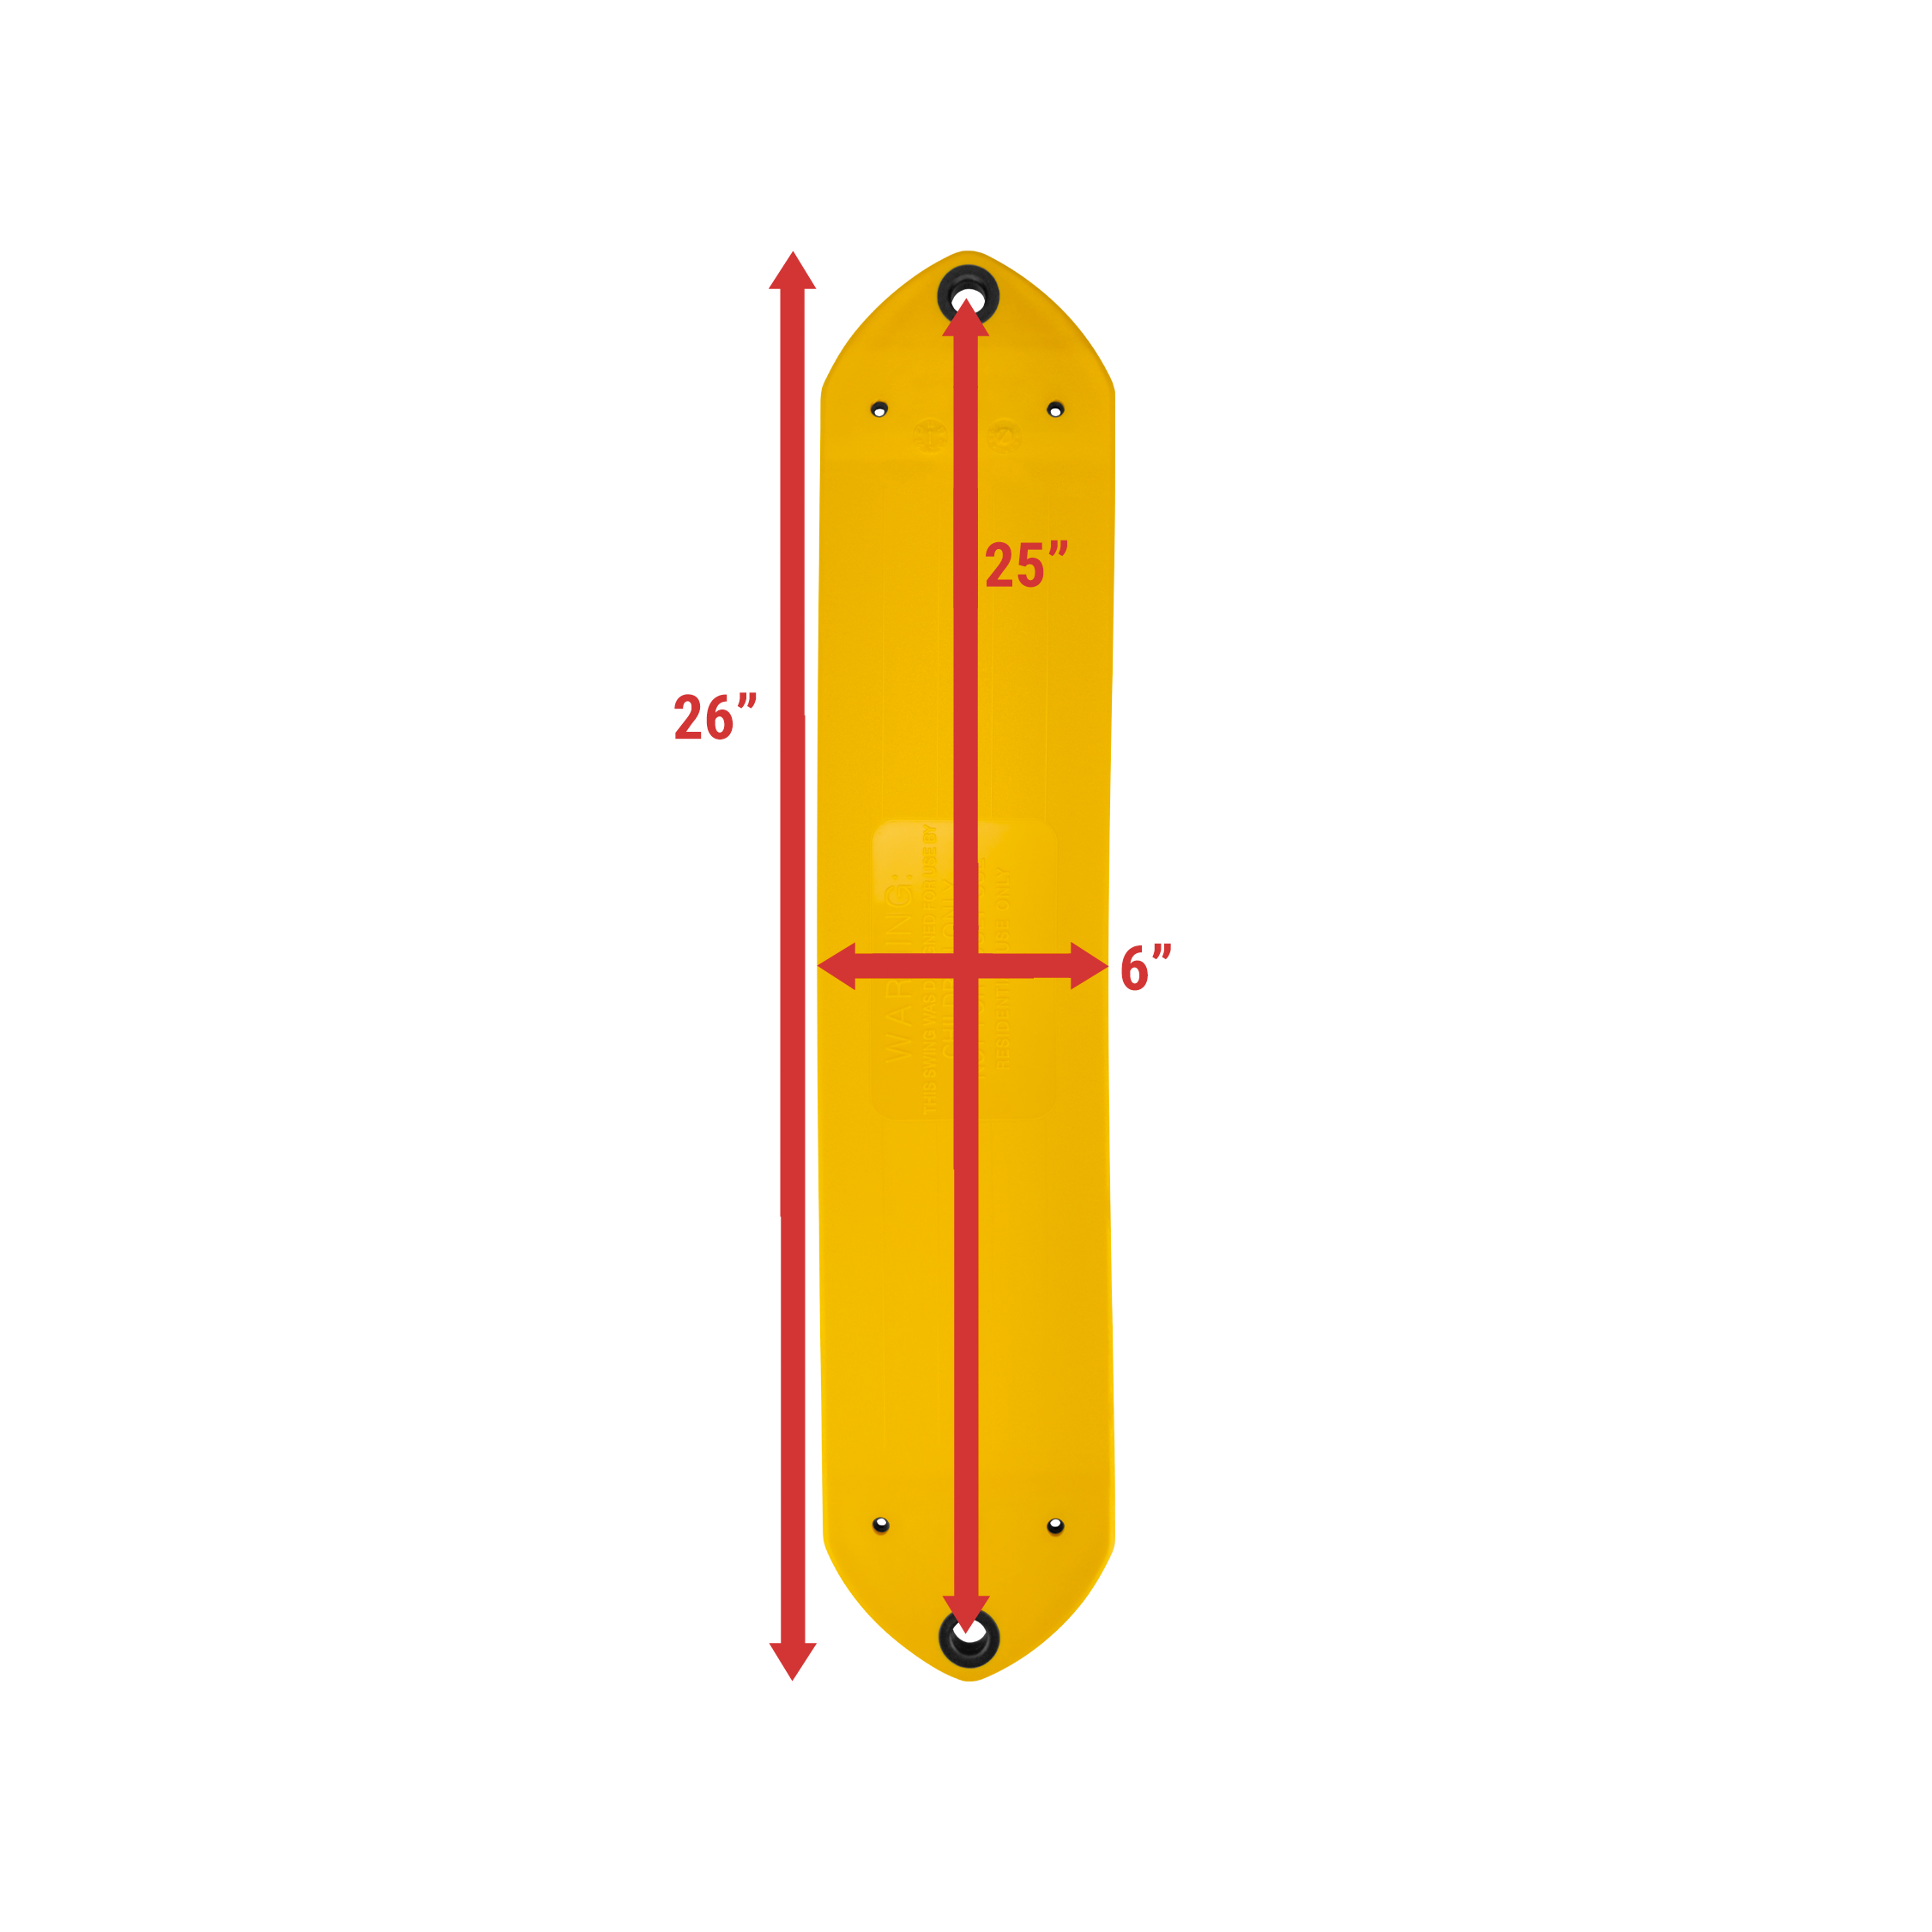 An image showing the dimensions of an s181 yellow